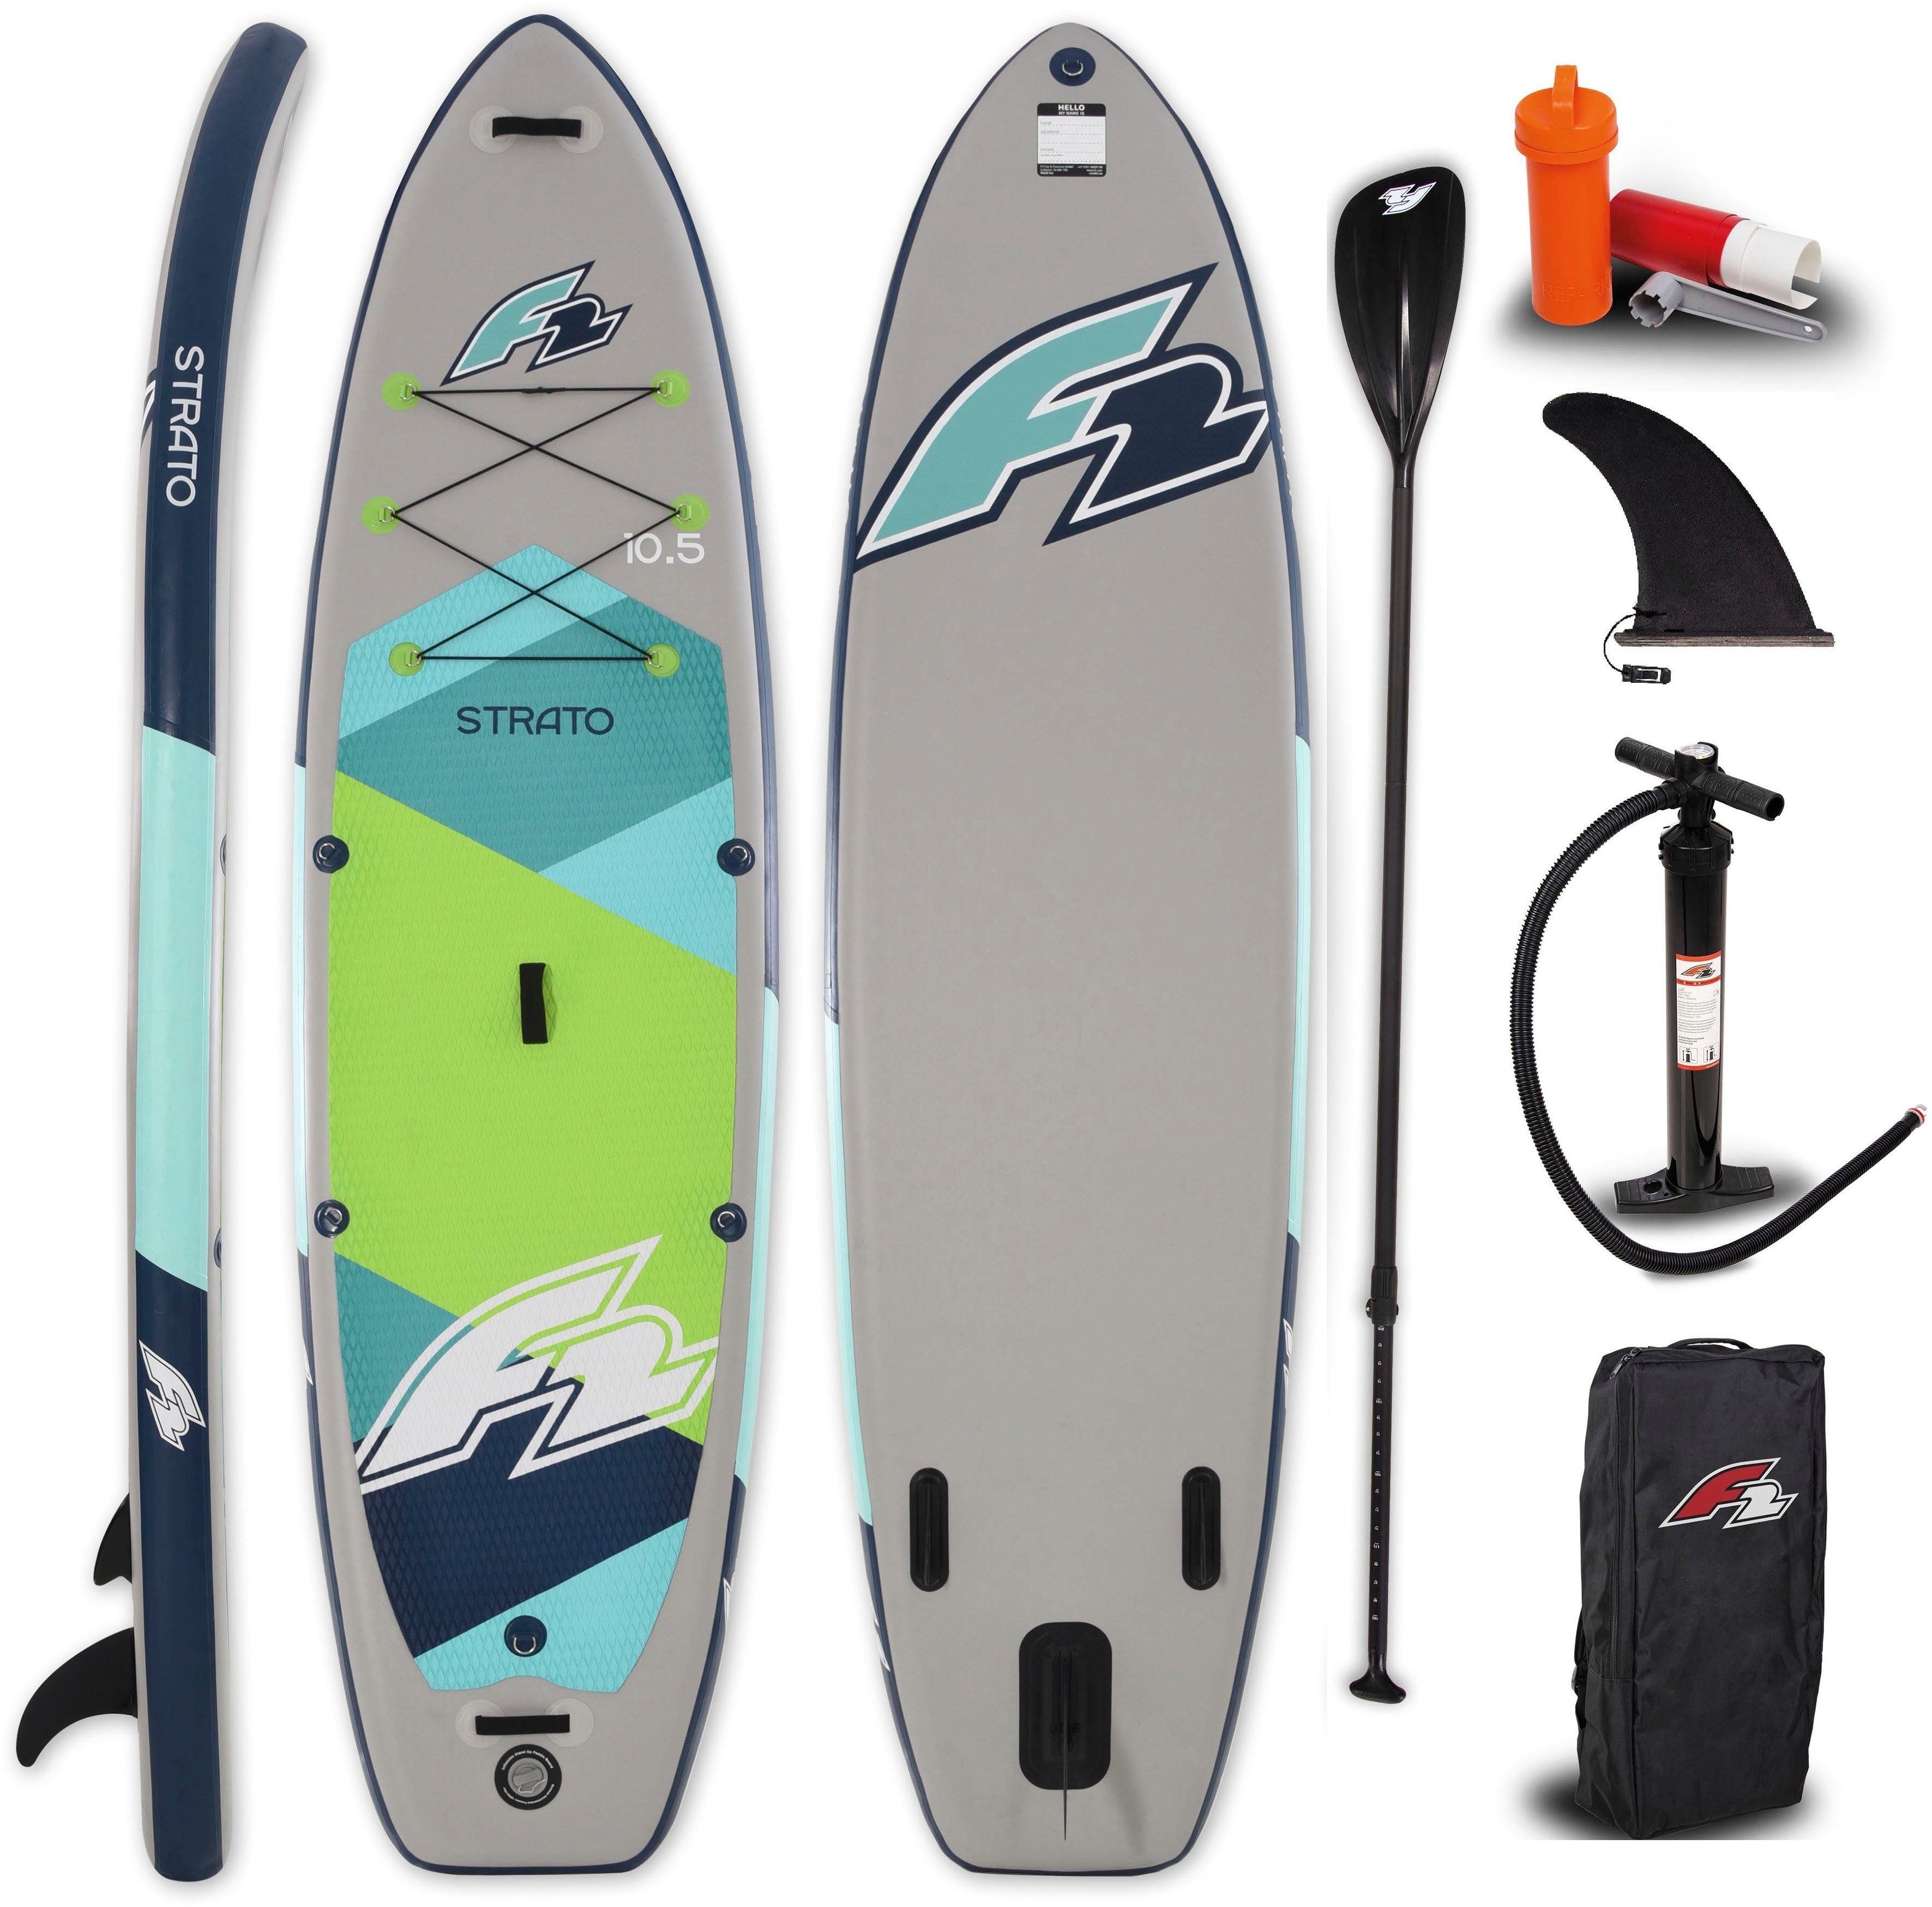 SUP-Board (Packung, 10,5 Inflatable F2 5 Strato tlg) green,